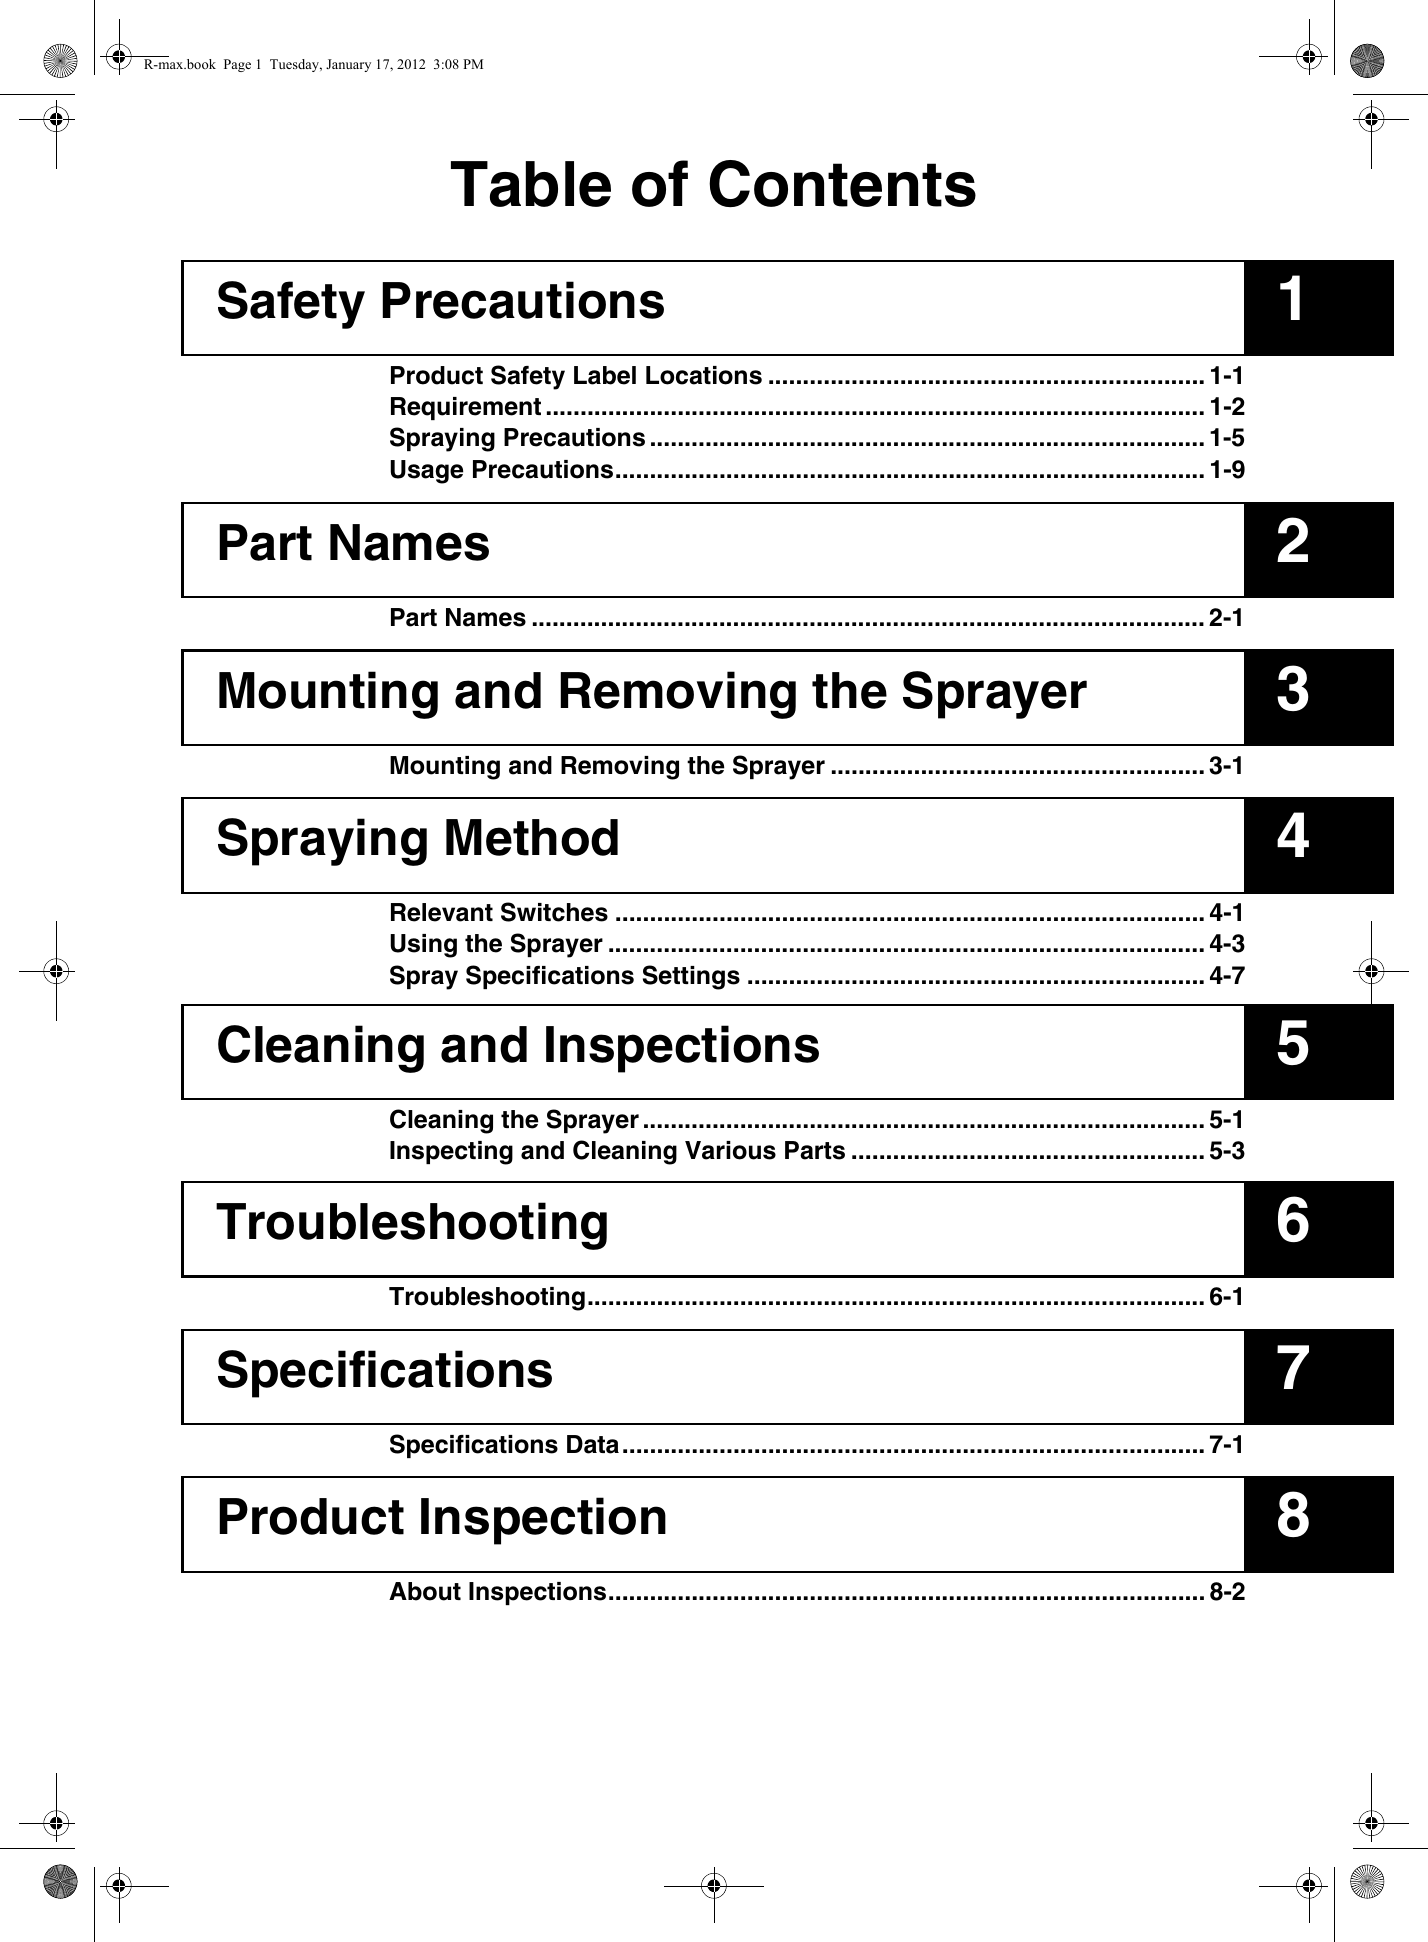 12345678Table of ContentsSafety PrecautionsProduct Safety Label Locations ............................................................... 1-1Requirement ............................................................................................... 1-2Spraying Precautions ................................................................................ 1-5Usage Precautions..................................................................................... 1-9Part NamesPart Names ................................................................................................. 2-1Mounting and Removing the SprayerMounting and Removing the Sprayer ...................................................... 3-1Spraying MethodRelevant Switches ..................................................................................... 4-1Using the Sprayer ...................................................................................... 4-3Spray Specifications Settings .................................................................. 4-7Cleaning and InspectionsCleaning the Sprayer ................................................................................. 5-1Inspecting and Cleaning Various Parts ................................................... 5-3TroubleshootingTroubleshooting......................................................................................... 6-1SpecificationsSpecifications Data.................................................................................... 7-1Product InspectionAbout Inspections...................................................................................... 8-2R-max.book  Page 1  Tuesday, January 17, 2012  3:08 PM